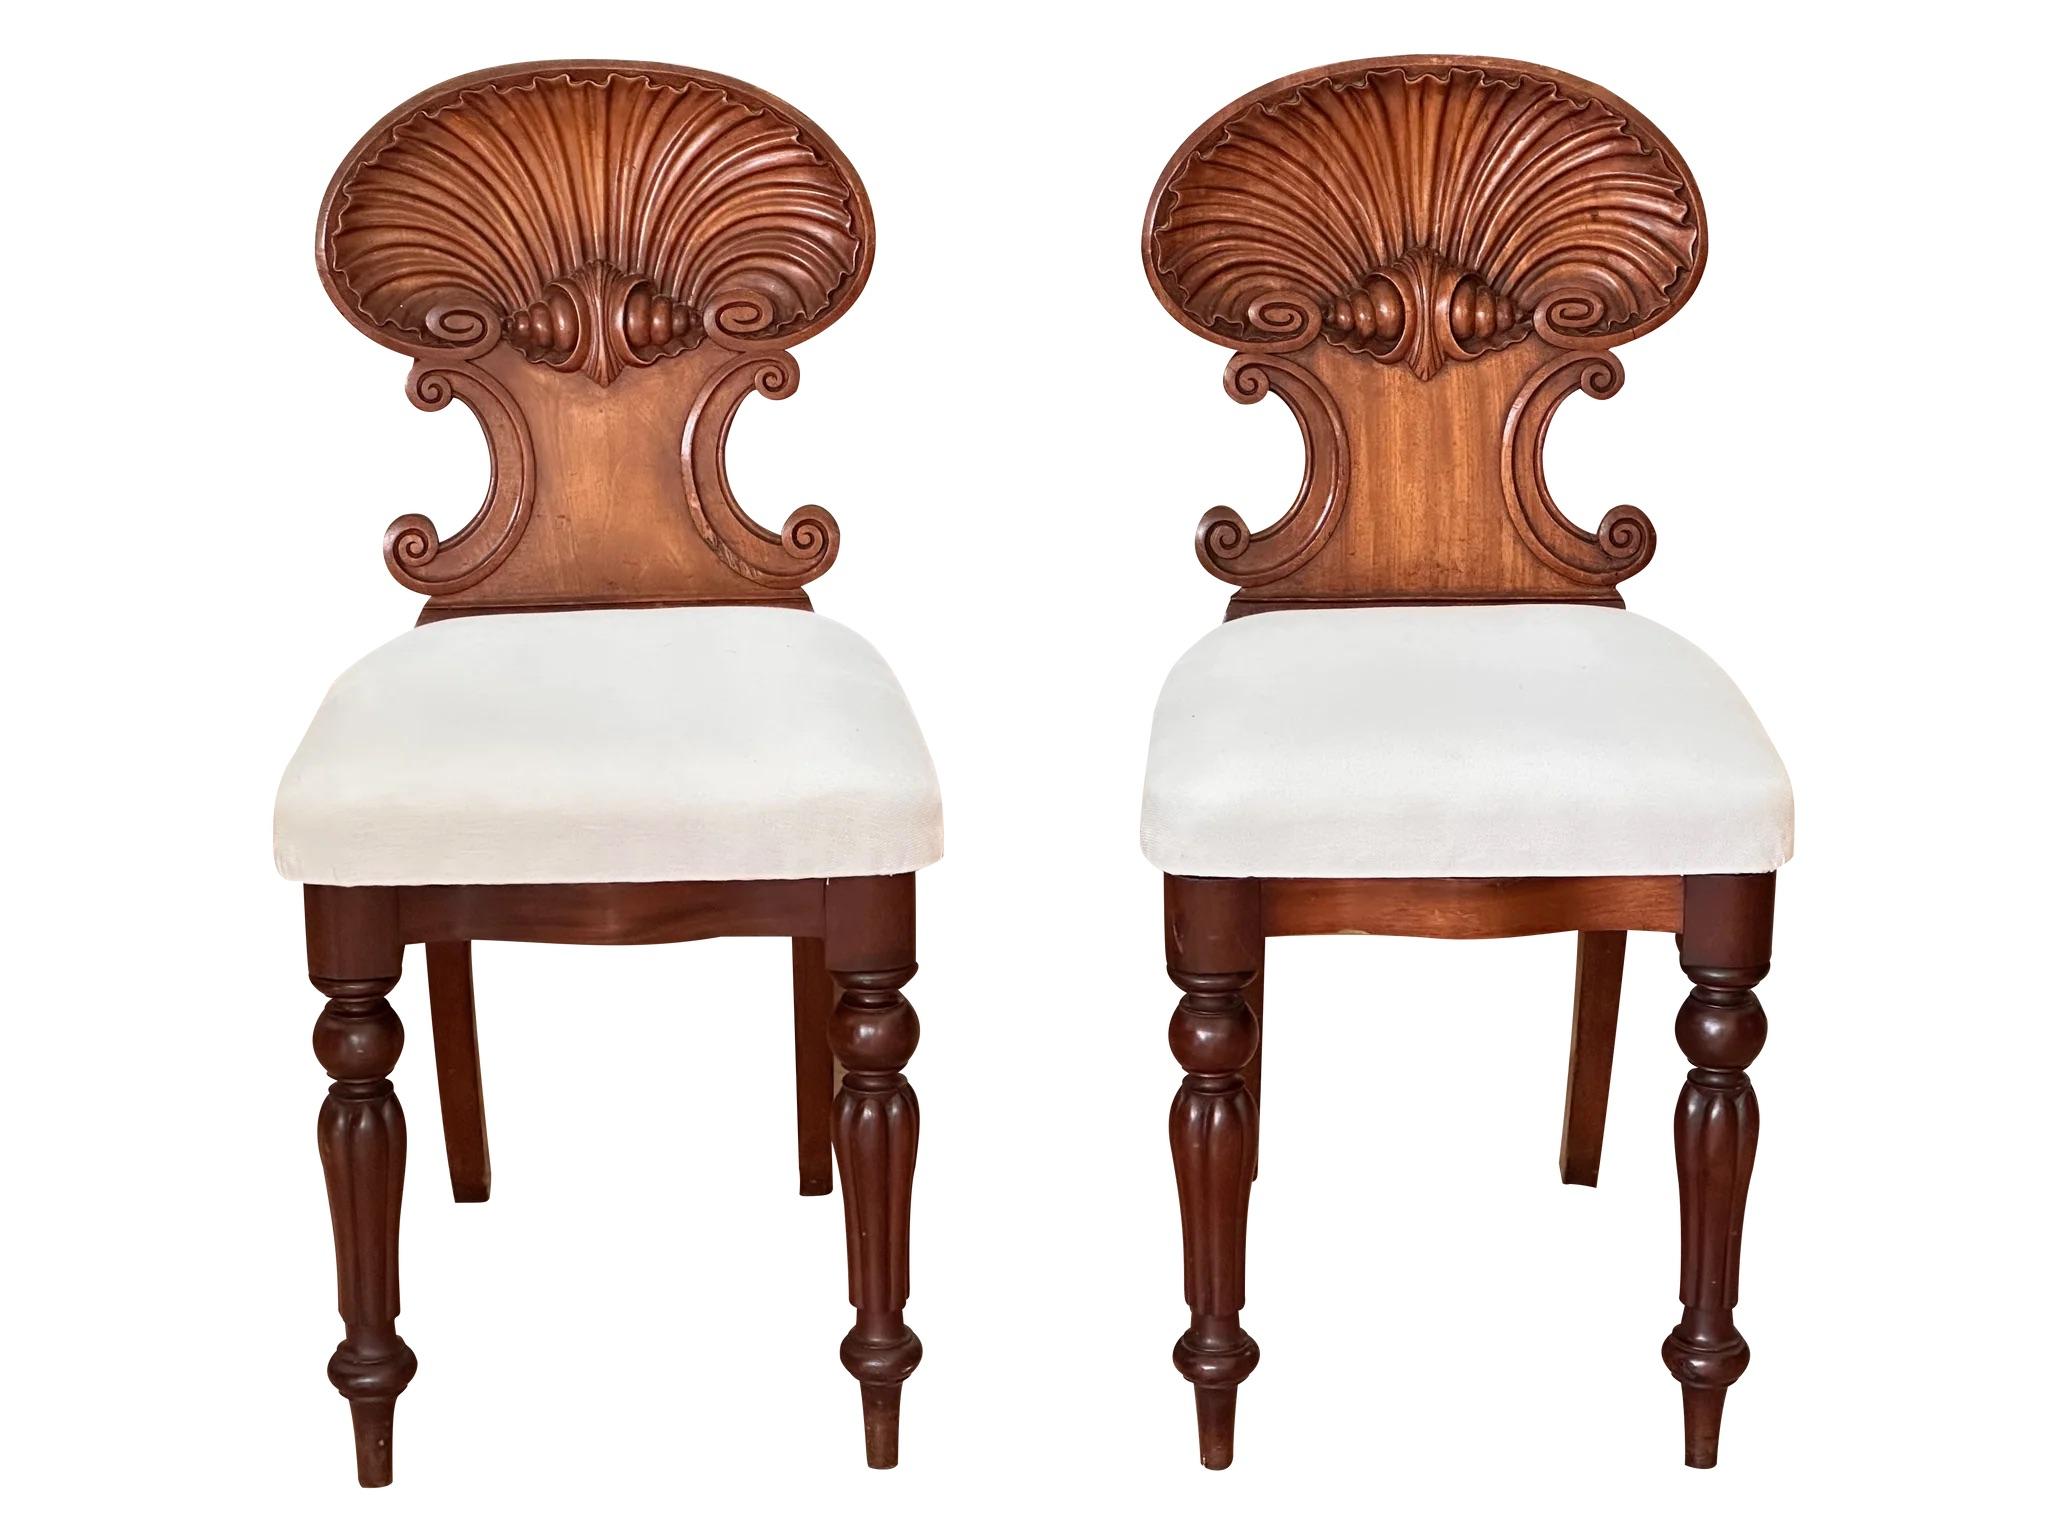 A pair of especially finely carved shell-back hall chairs, late 18th-early 19th Century, likely Irish, Mahogany with later upholstered seats.  SH 19”.
